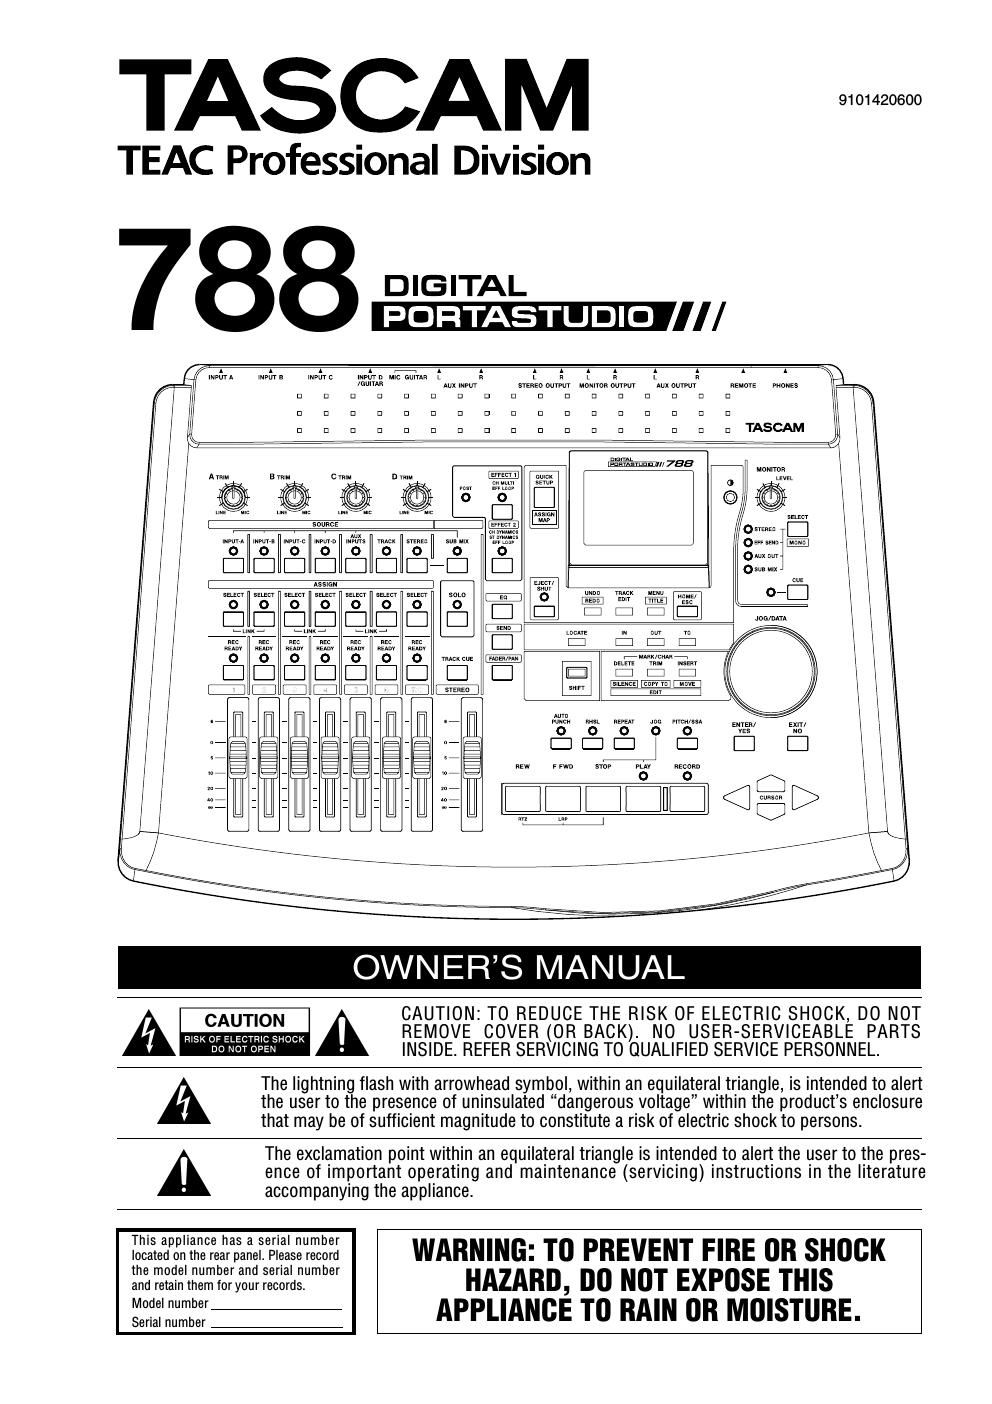 Tascam 788 Owners Manual